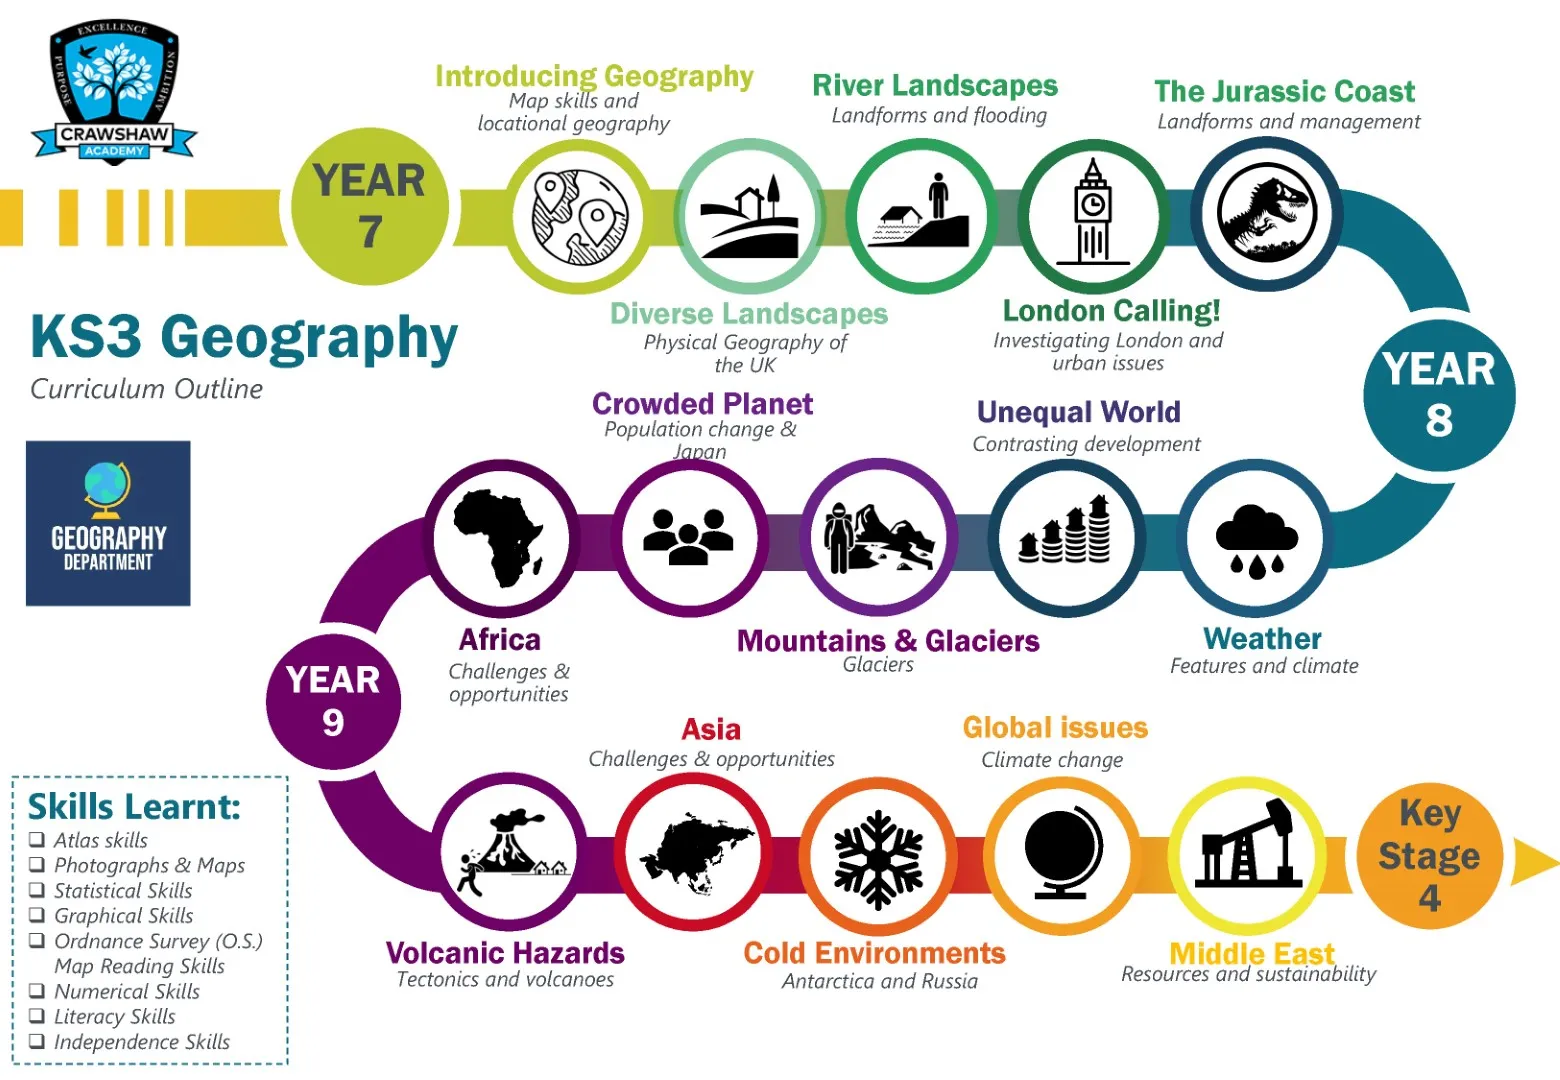 KS3 Geography overview